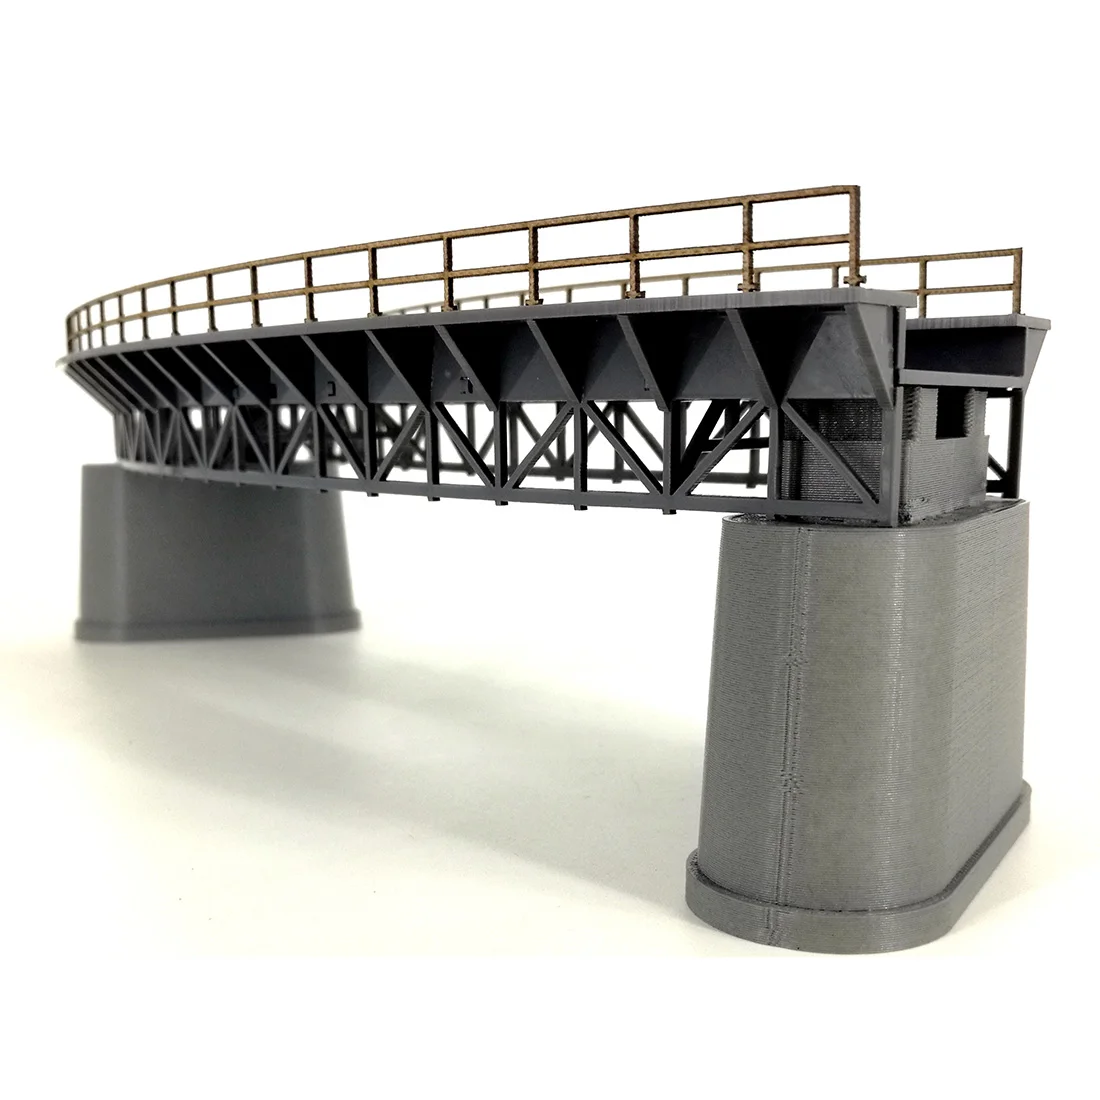 

NFSTRIKE 1:87 HO Scale Train Railway Scene Decoration Q4 R1 Curved Railway Bridge Model Without Pier For Sand Table Accessories